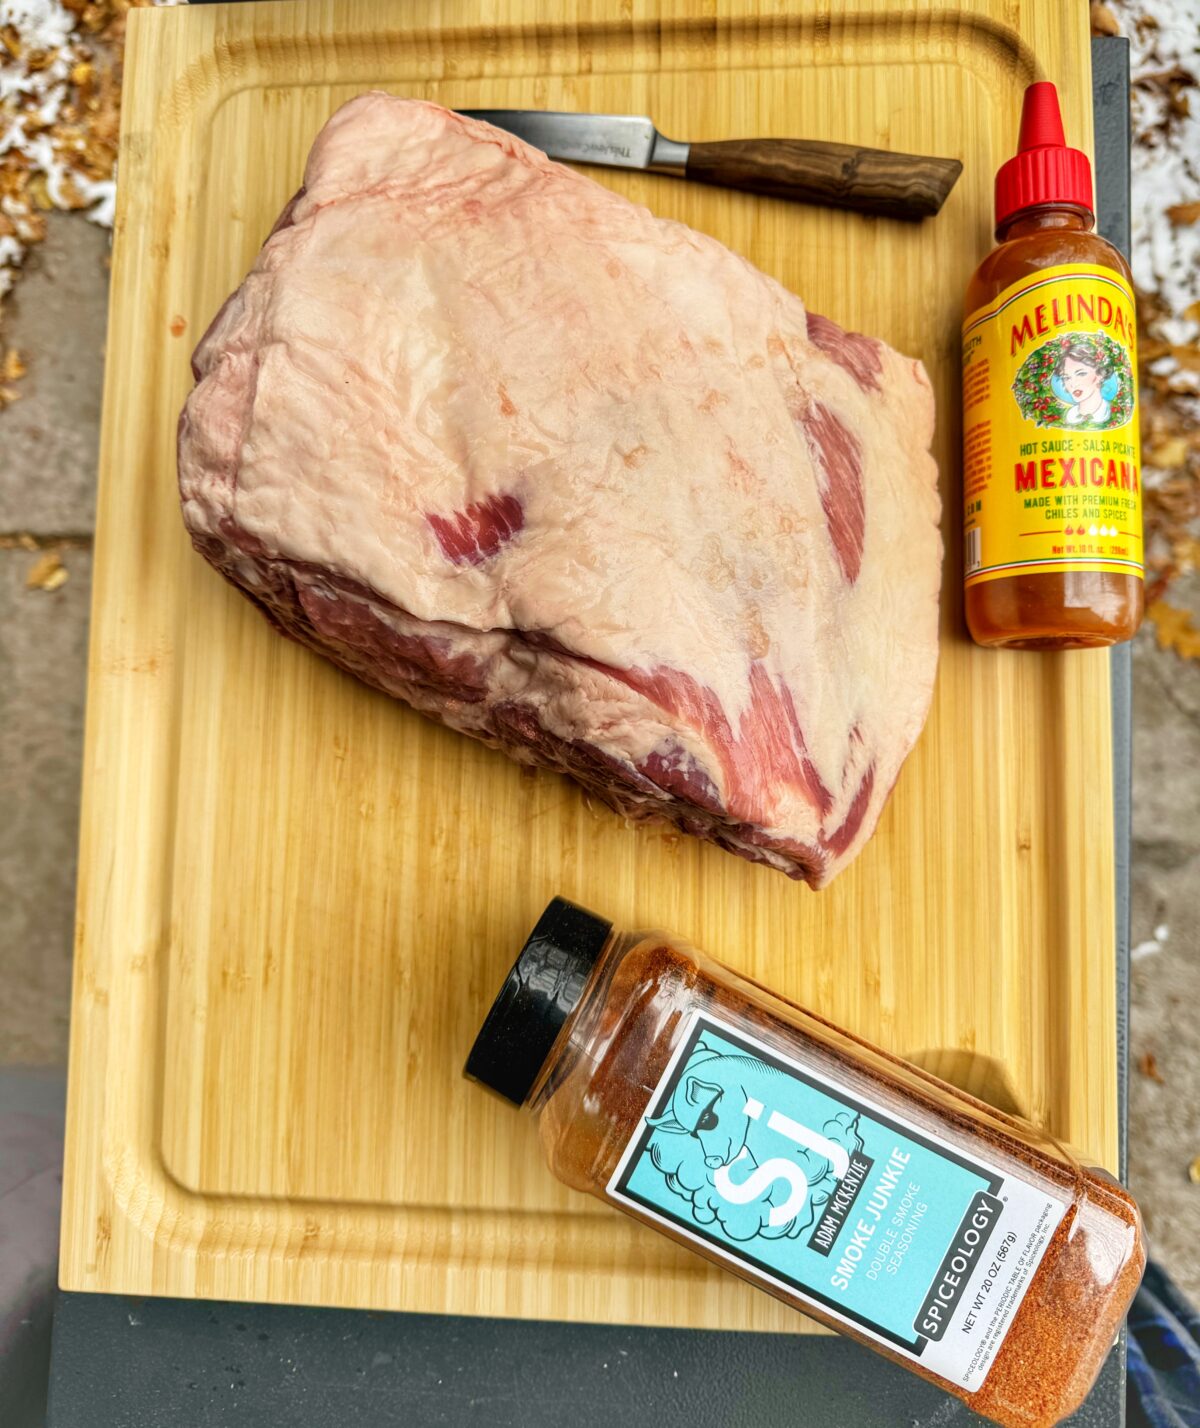 Ingredients for pulled pork on a cutting board.